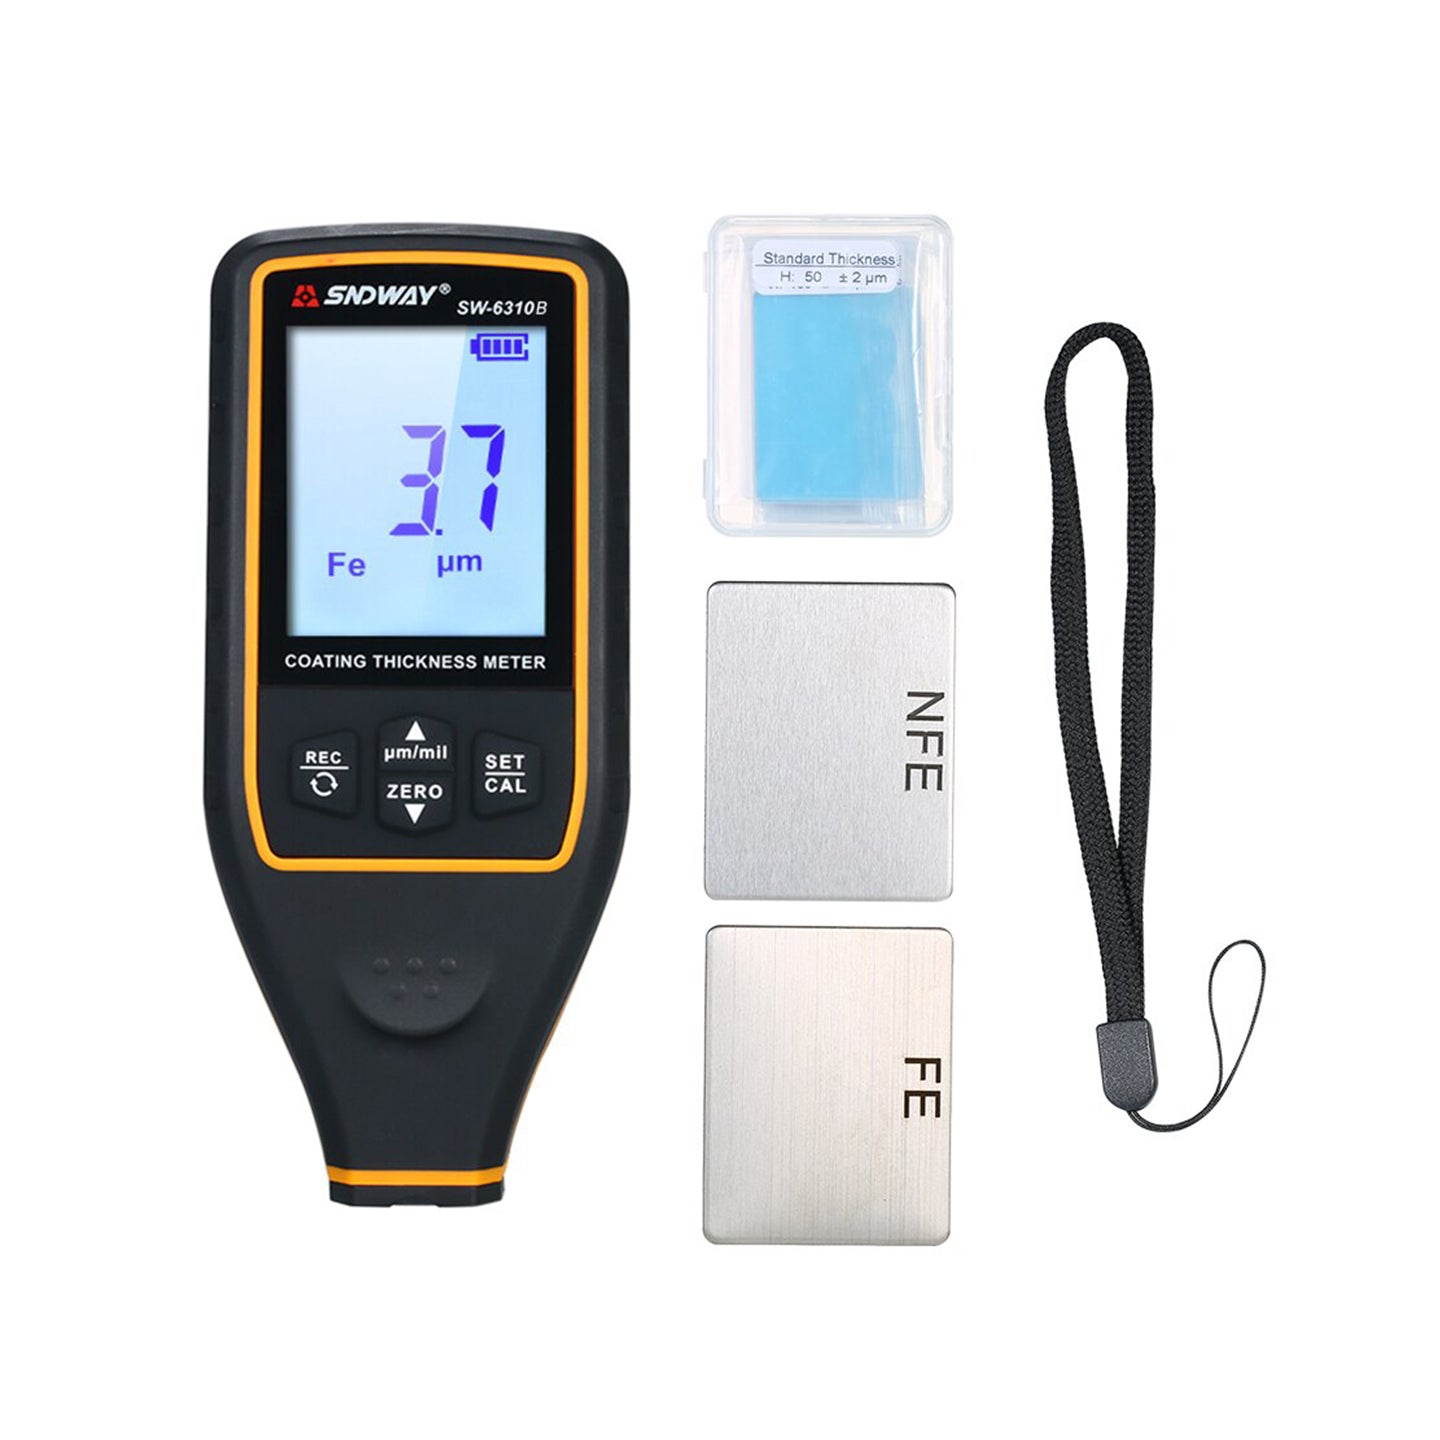 Sndway SW-6310B Digital Paint Coating Thickness Meter Gauge Measuring Instrument with 2.0" LCD Display, Low Battery Notification, Auto Power Off Function